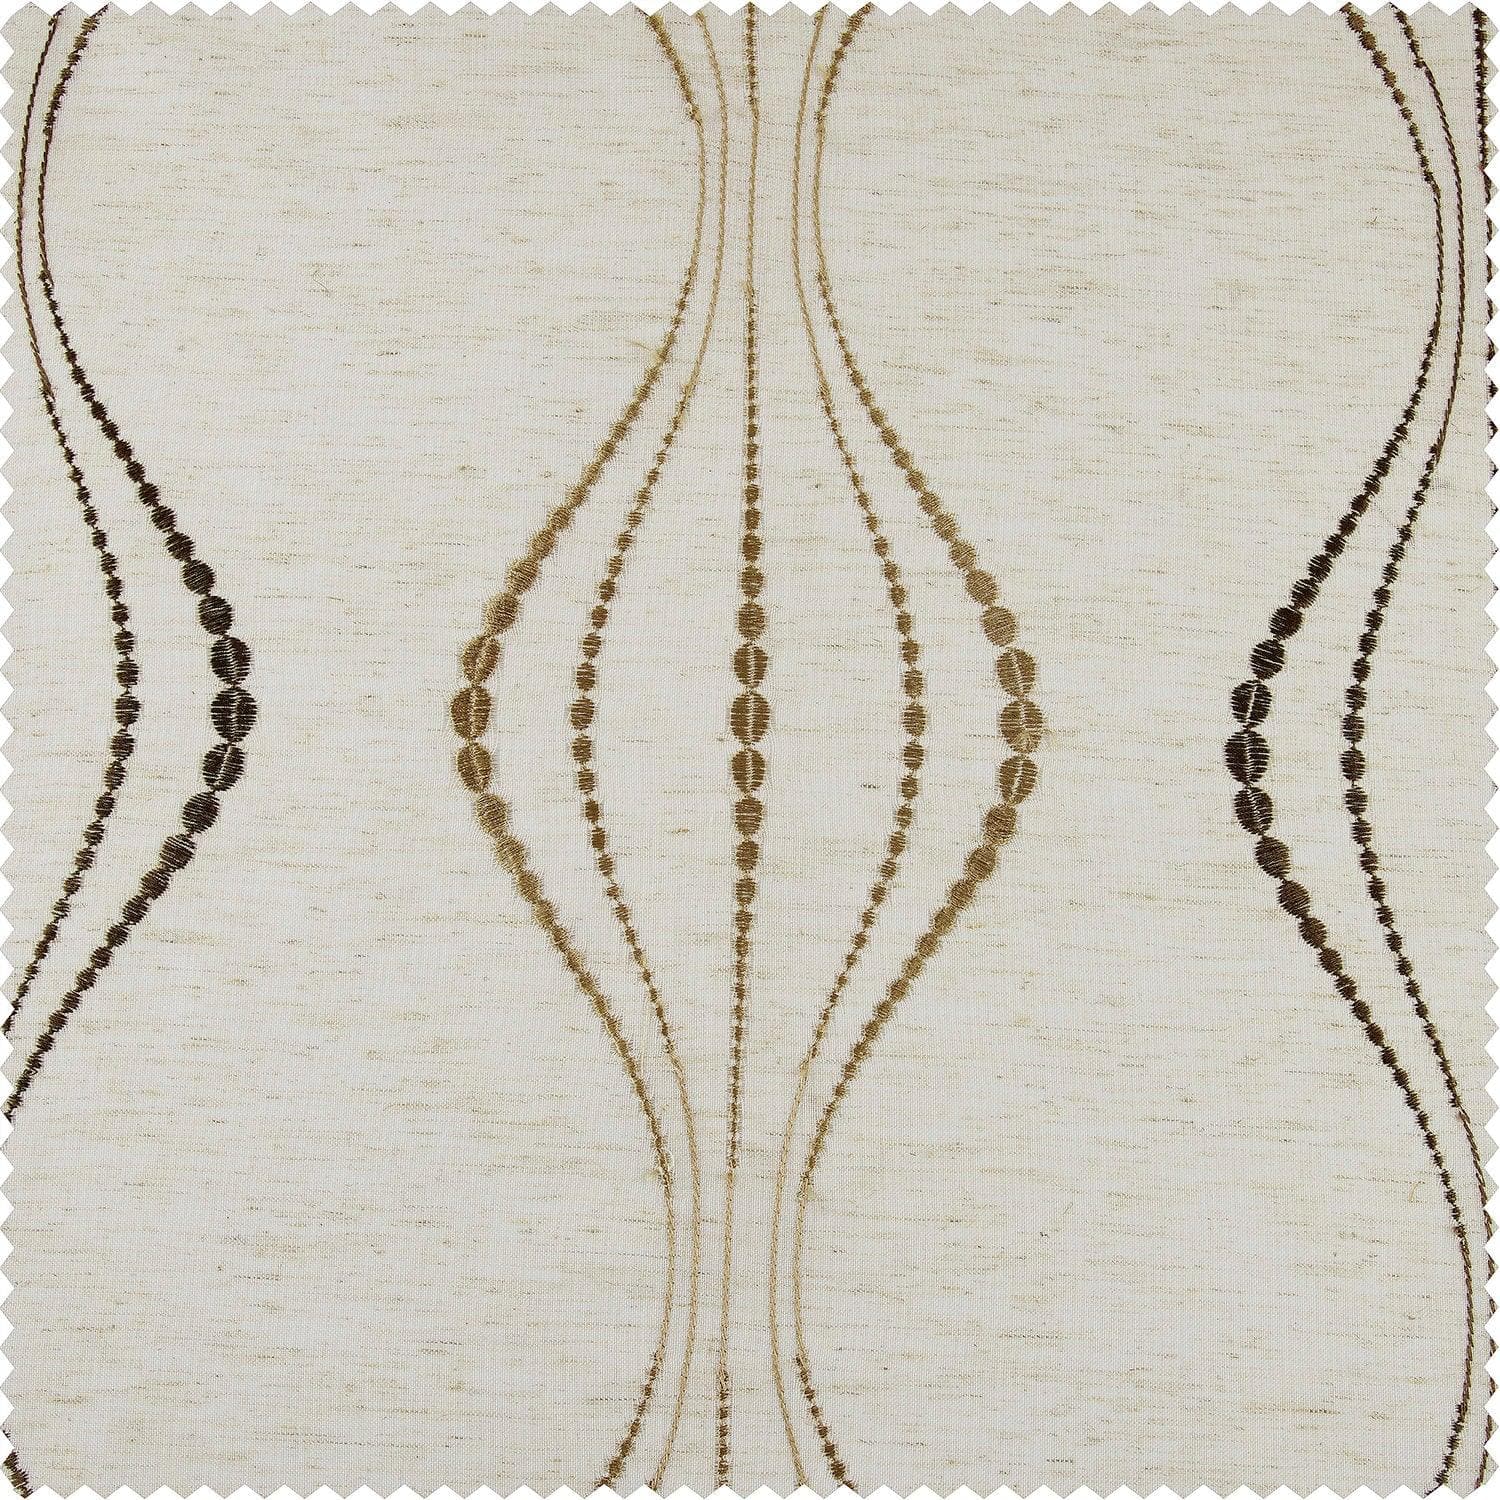 Suez Bronze Striped Embroidered Patterned Faux Linen Sheer Curtain